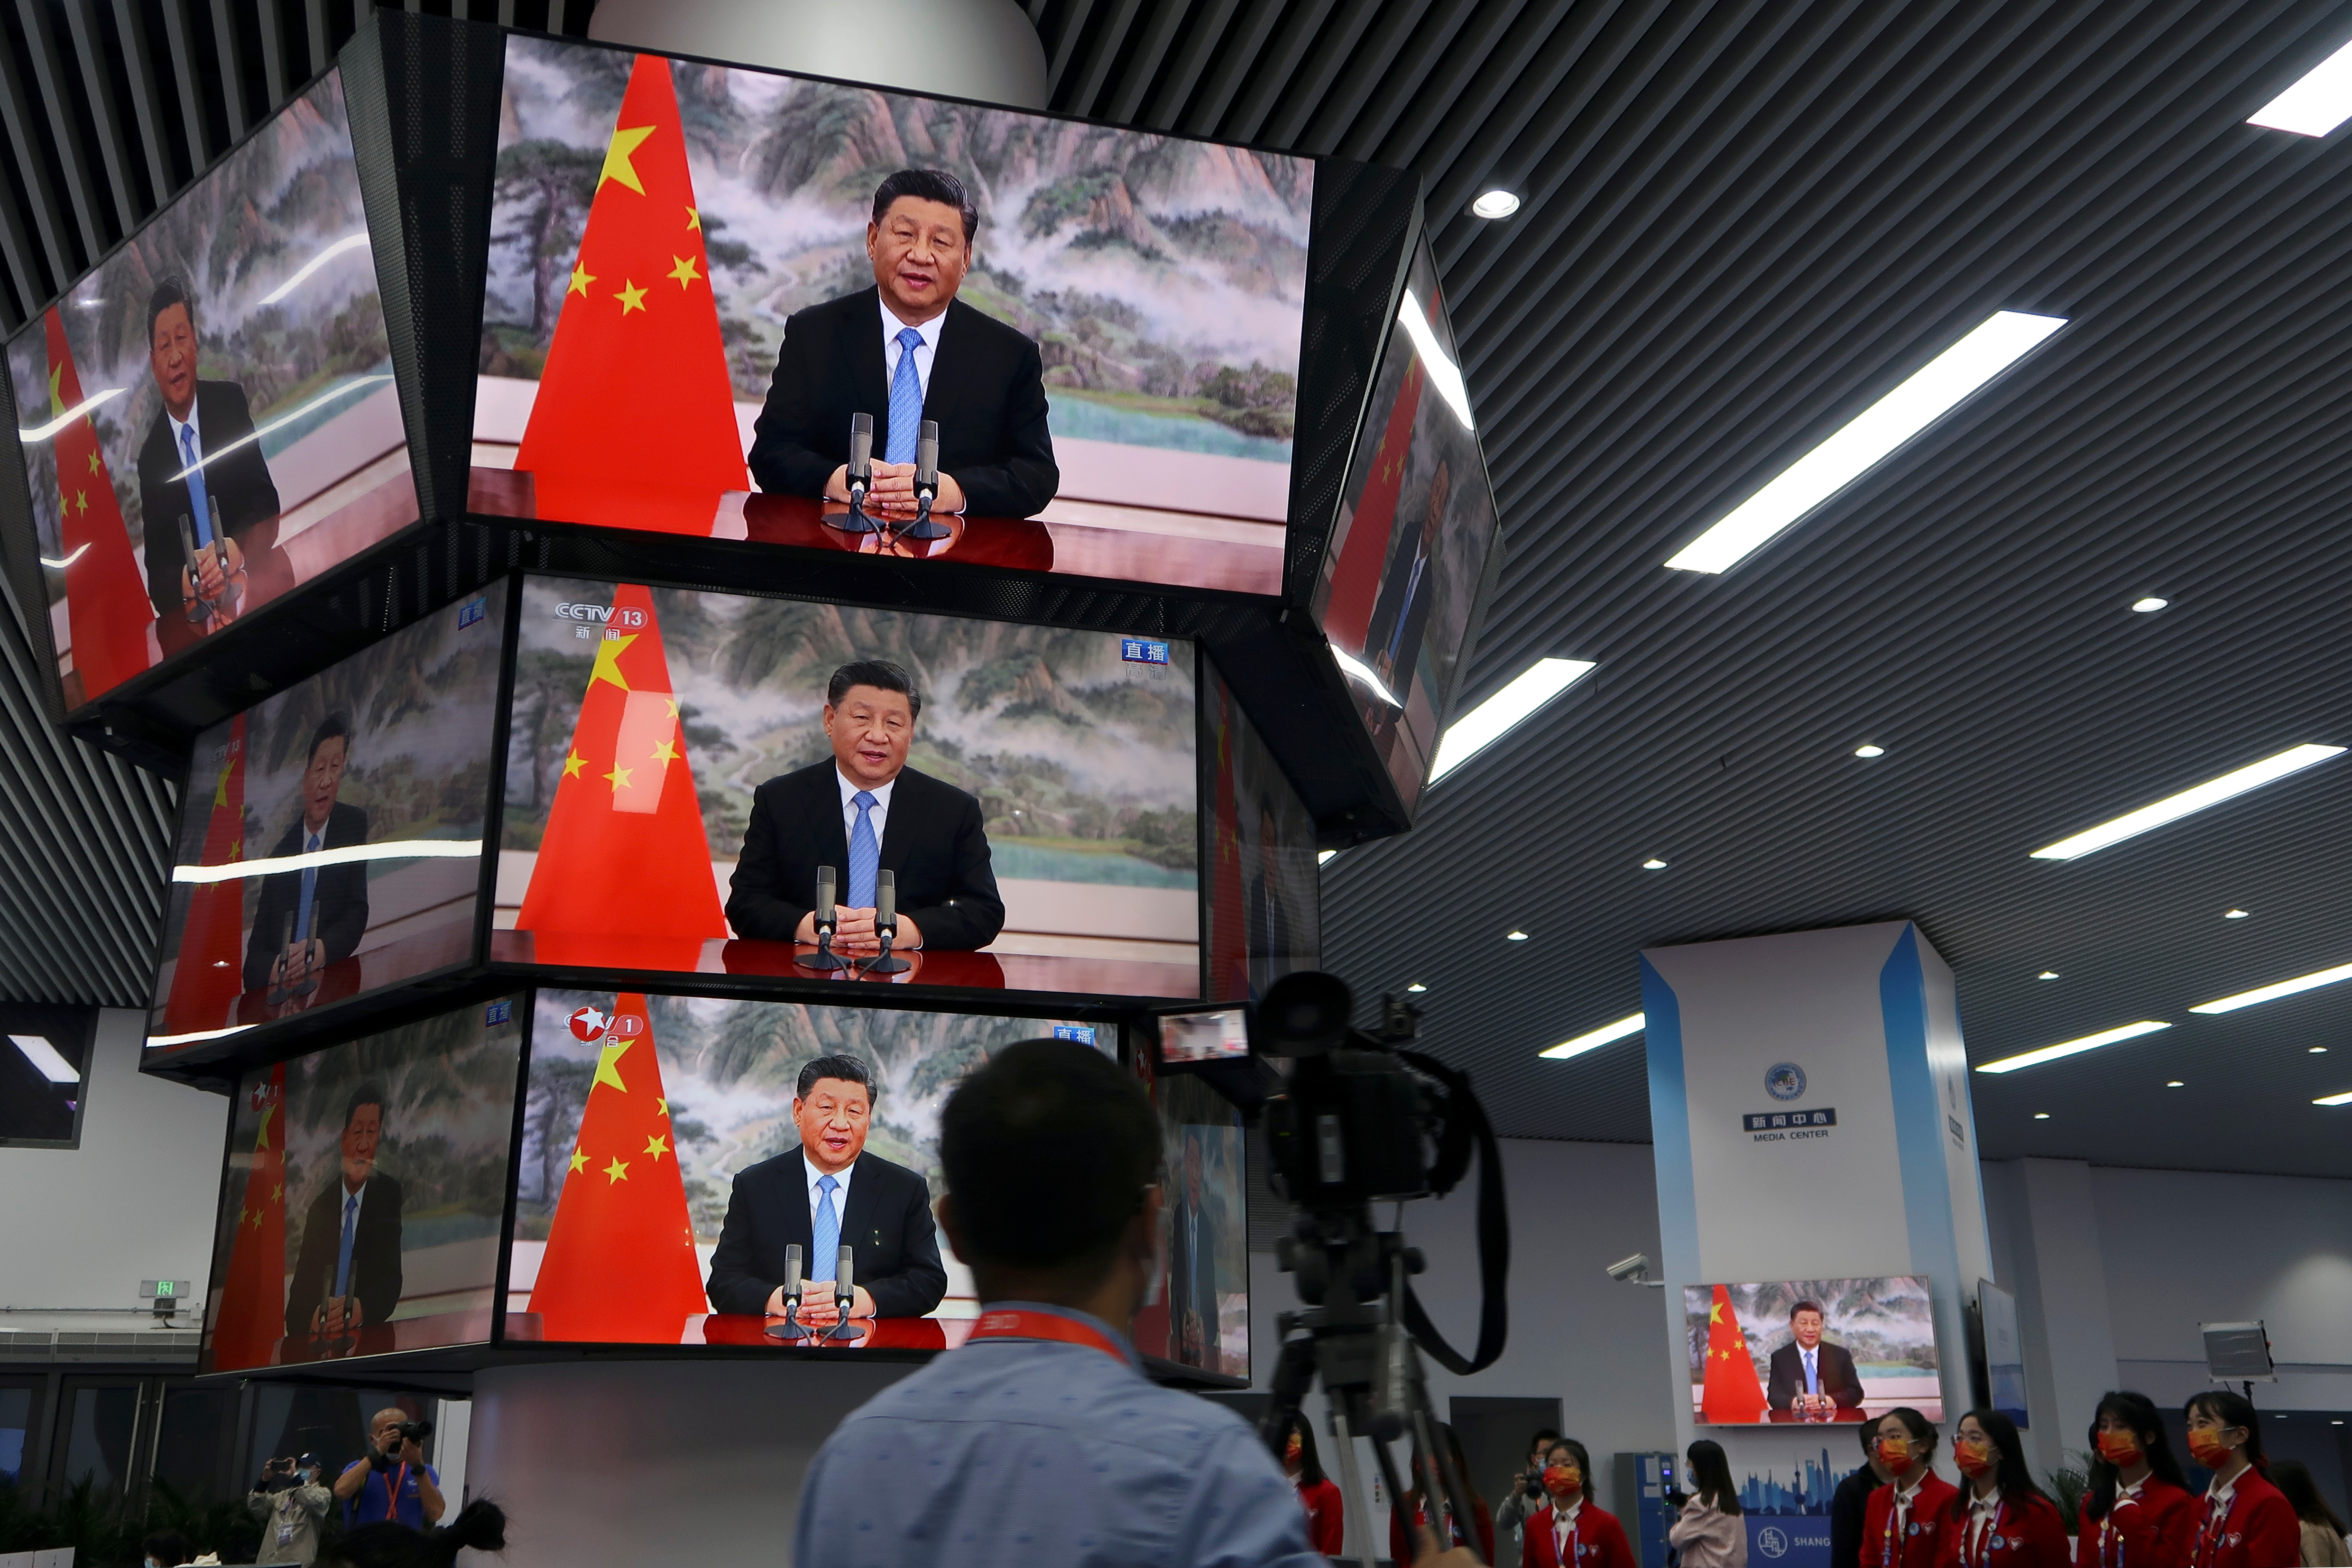 Chinese President Xi Jinping is seen on television screens at a media centre as he delivers a speech via video at the opening ceremony of the China International Import Expo (CIIE) in Shanghai, China November 4, 2021. REUTERS/Andrew Galbraith/File Photo